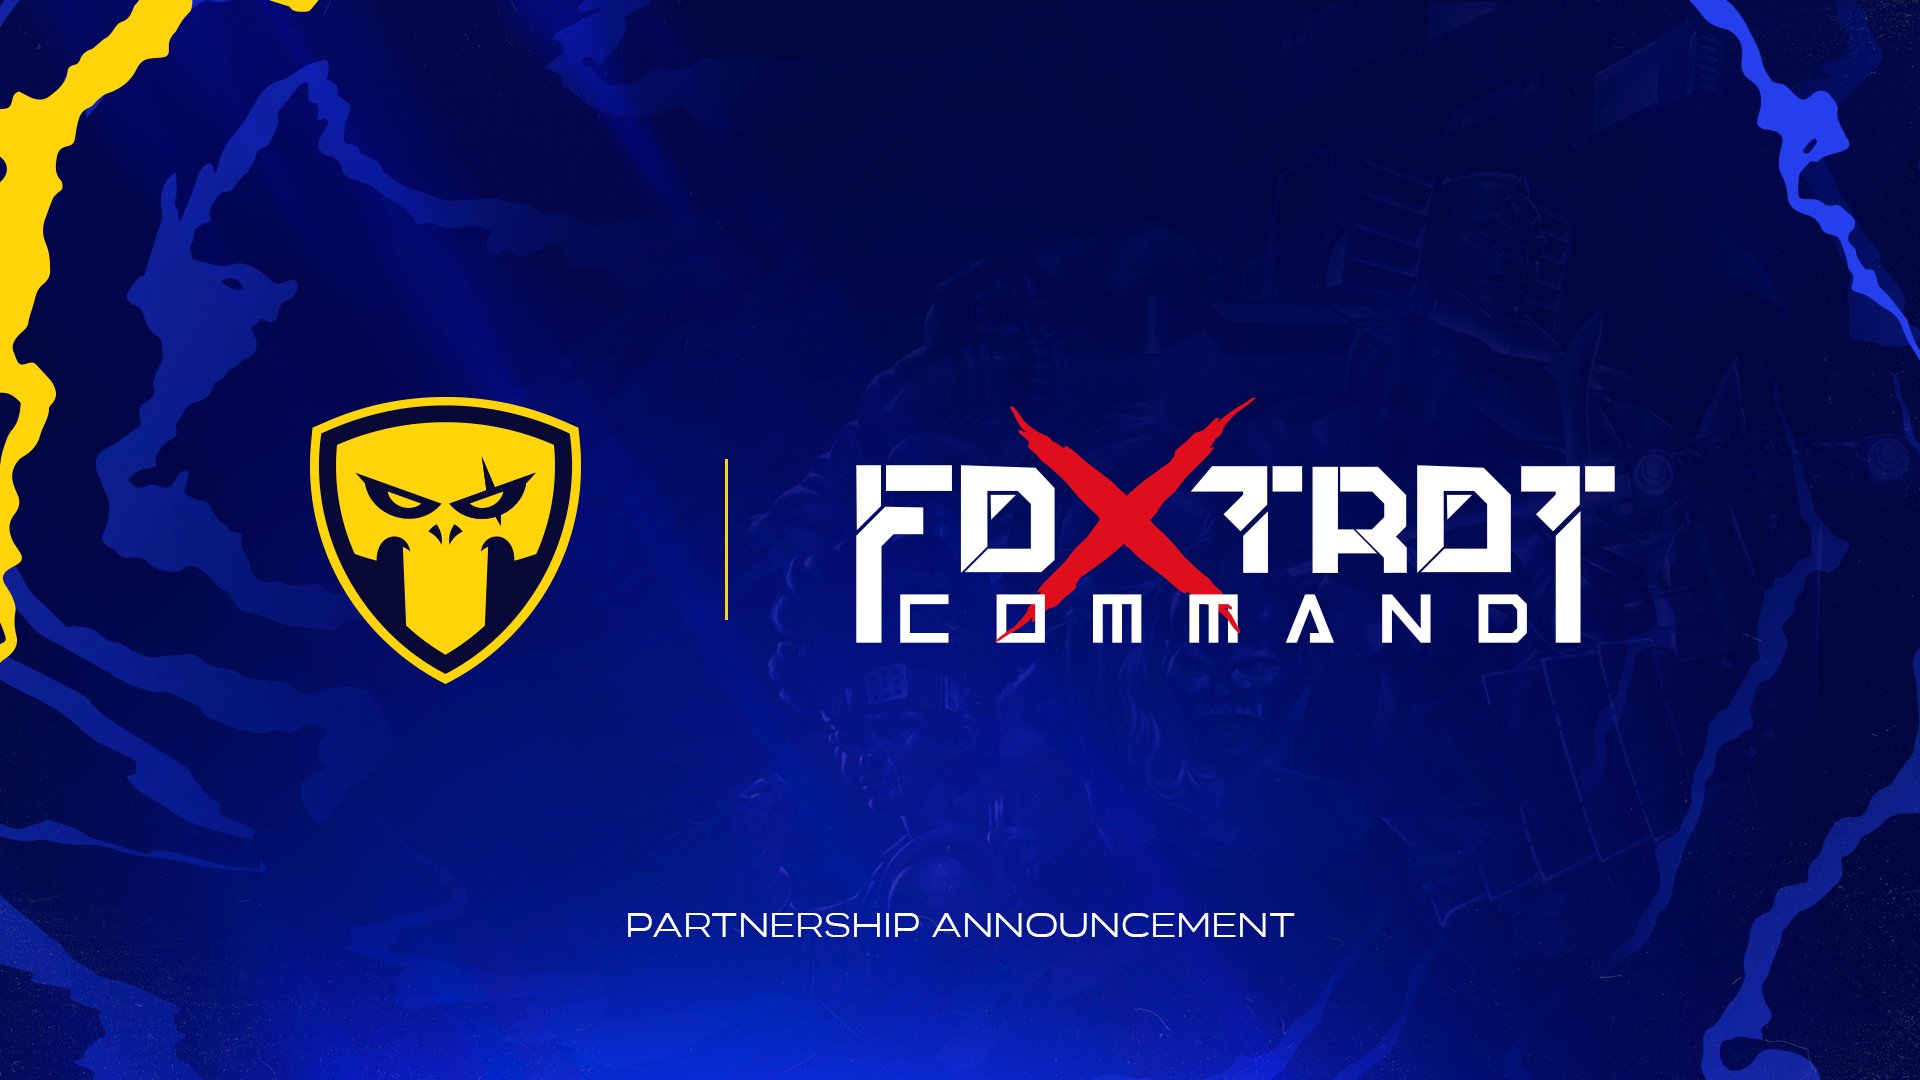 Team Queso partners with trading card game Foxtrot Command